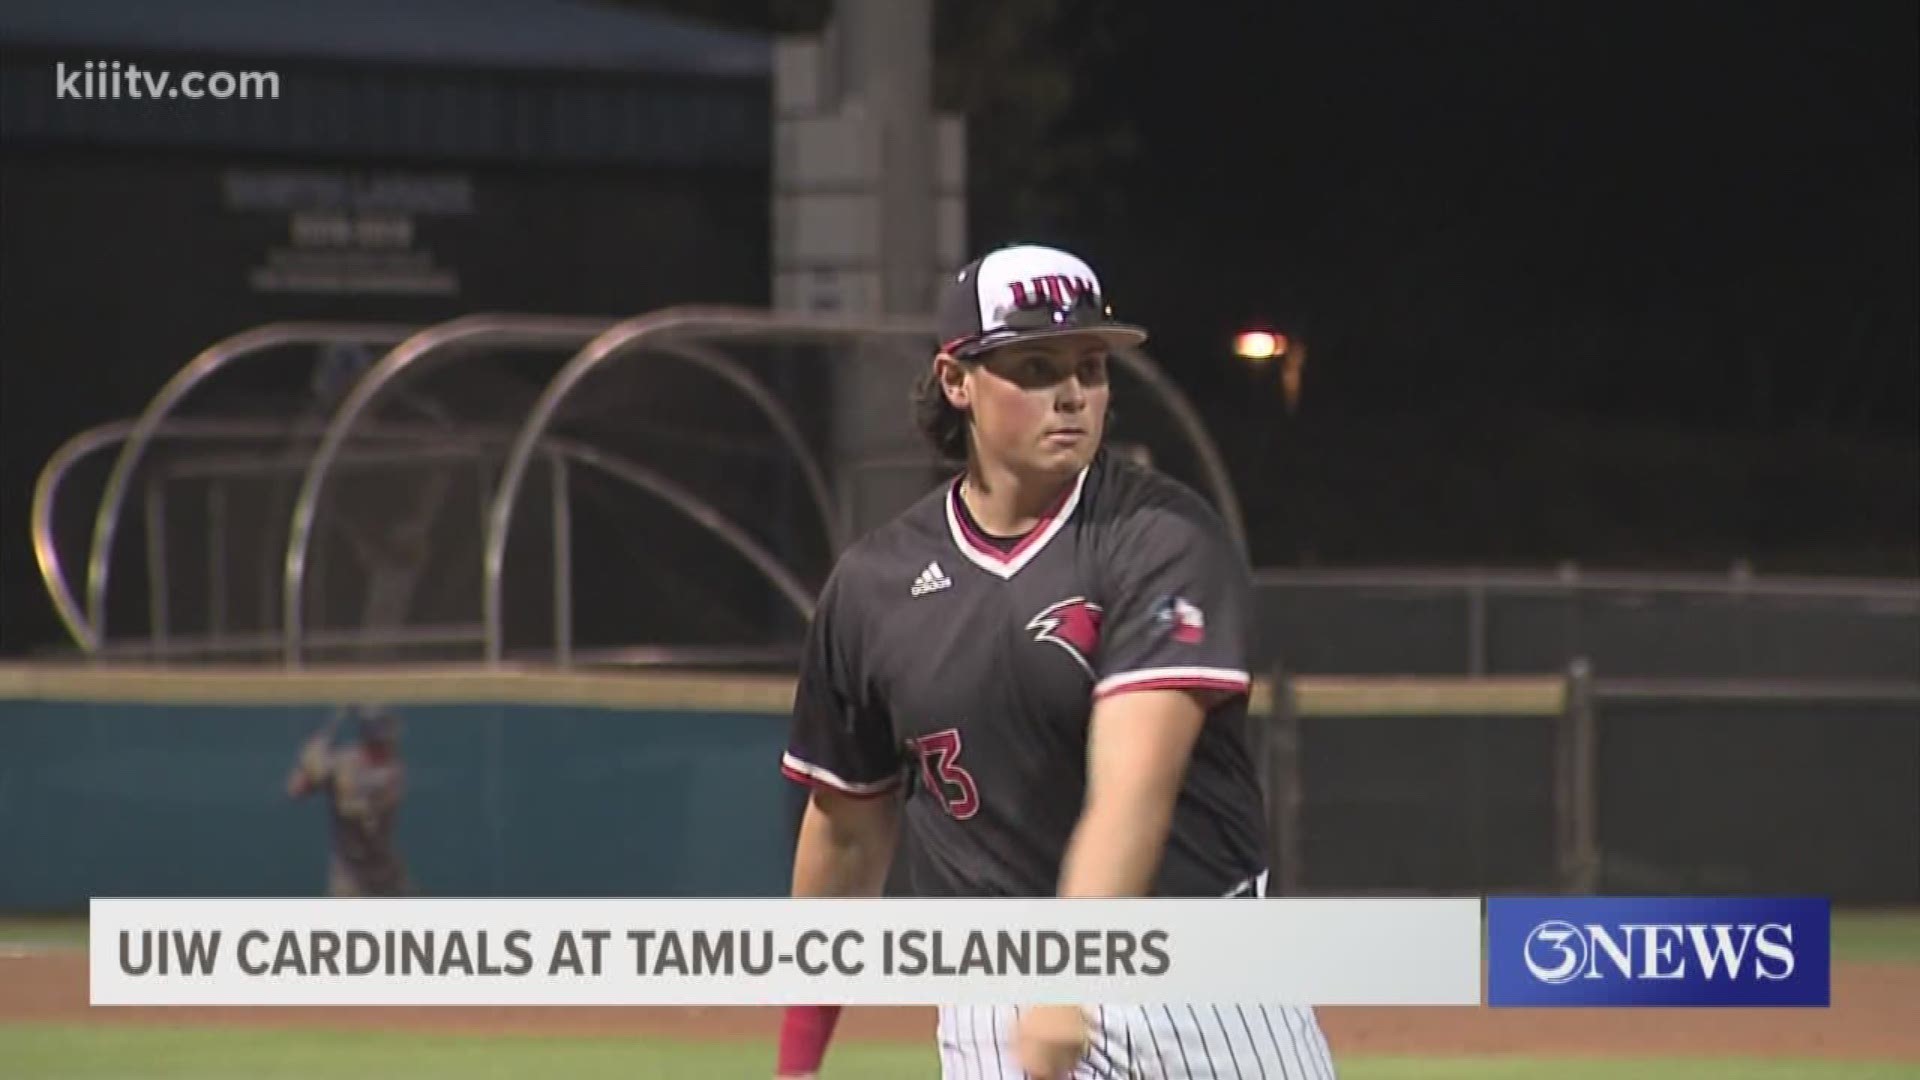 The Islanders rallied for the 3-2 win against UIW and former G-P Wildcat Luke Taggart, one of several local players in Friday's game.